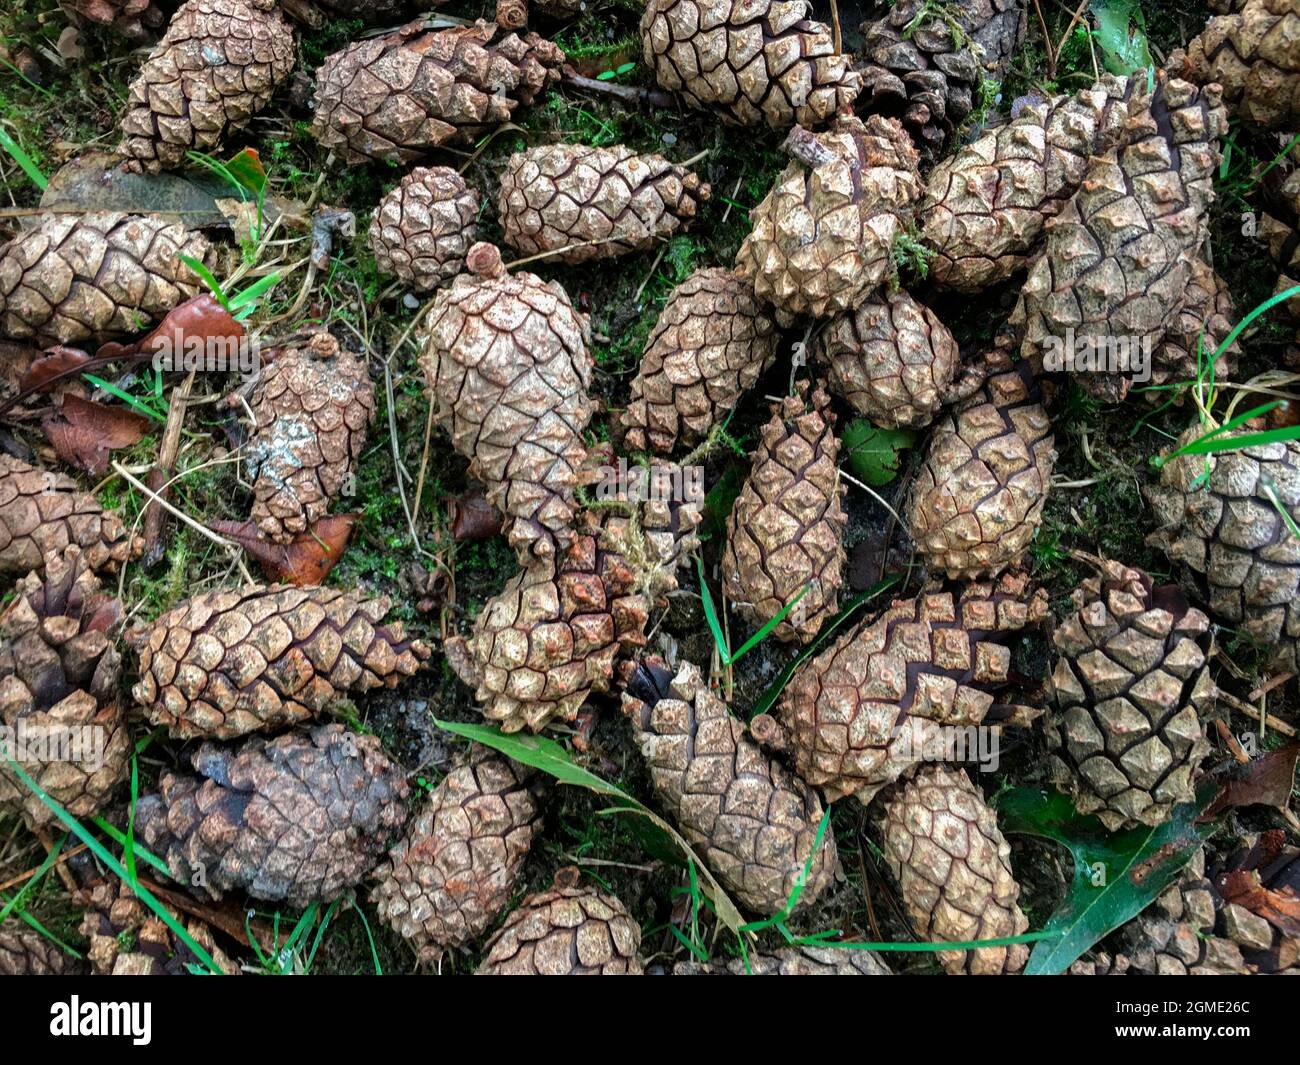 Conifer Cones or Pine Cones - the conical or rounded woody fruit of a pine tree, with scales which open to release the seeds. Stock Photo